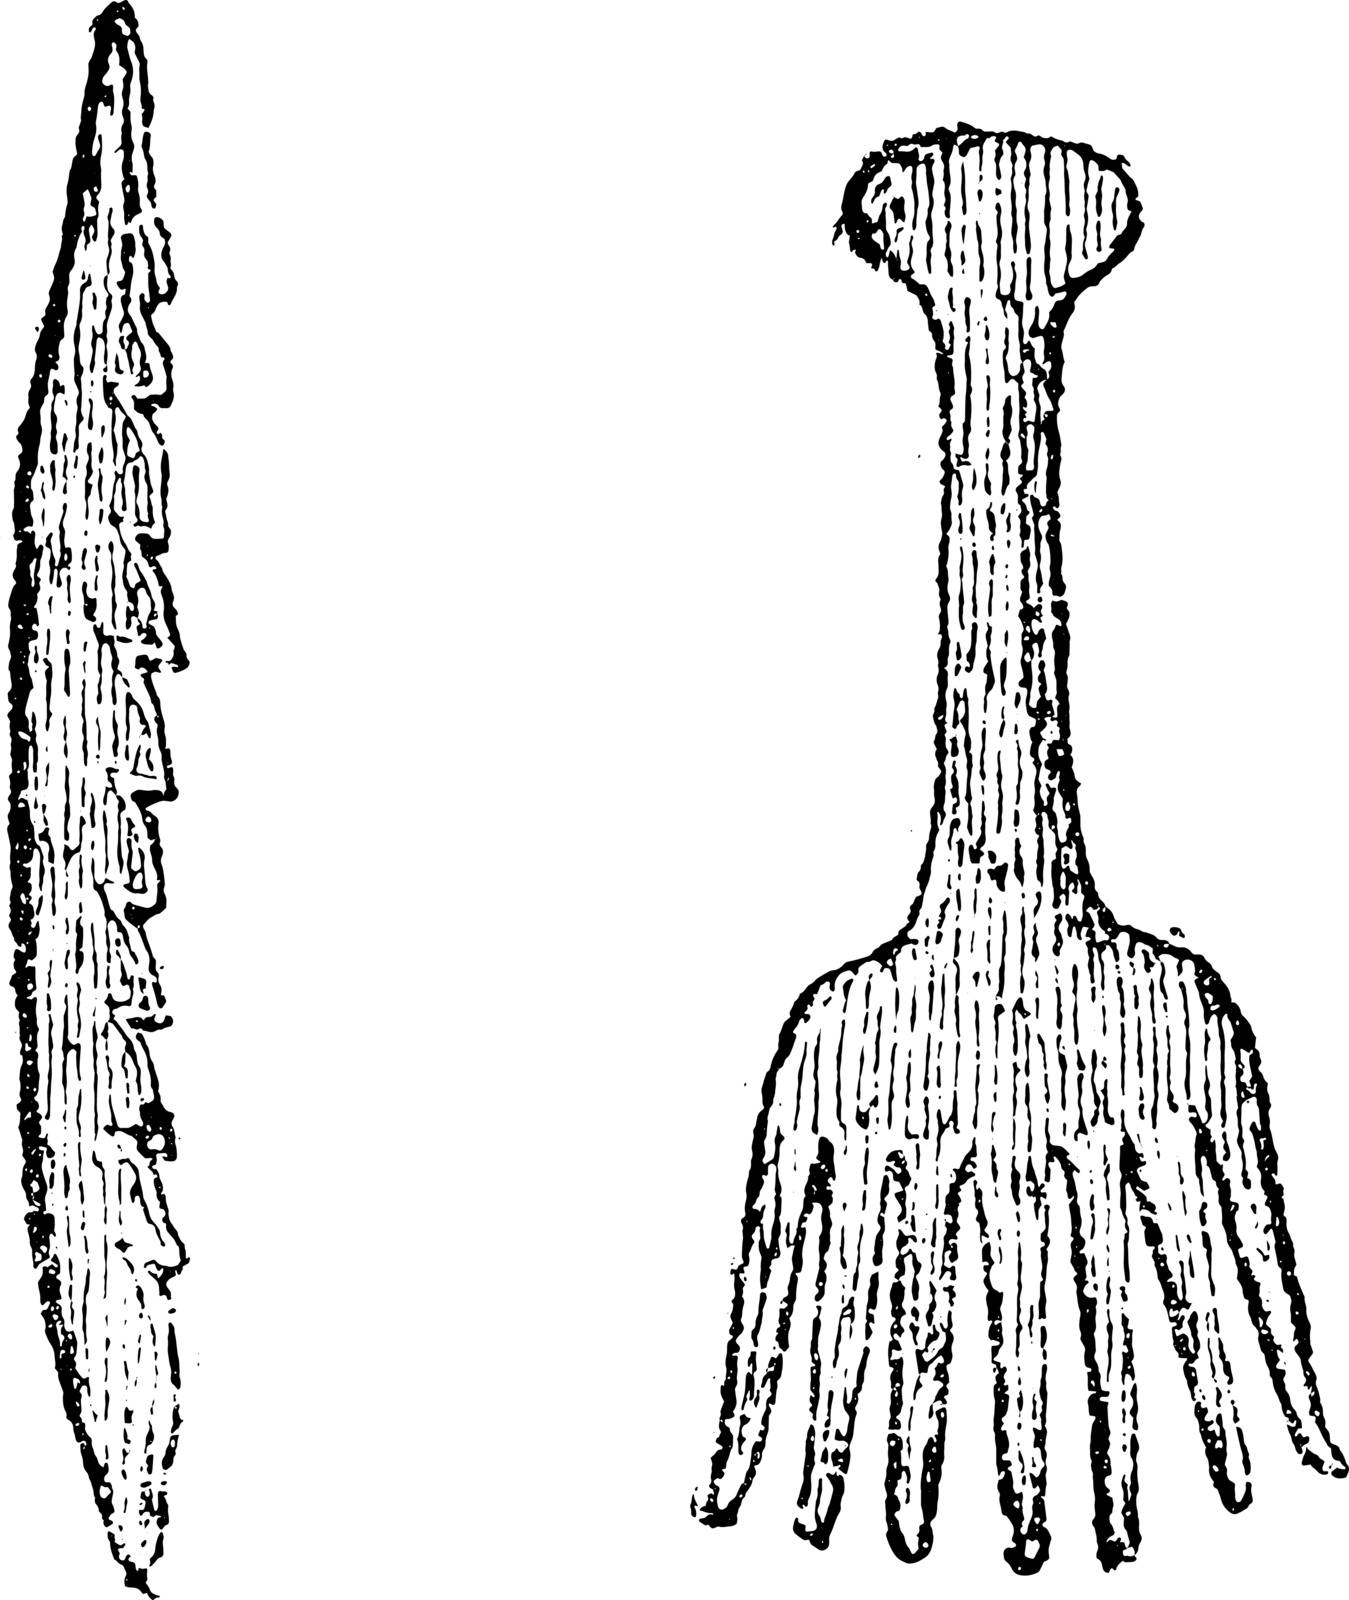 Bone harpoon, Bone comb from Denmark, vintage engraved illustration. From Natural Creation and Living Beings.
